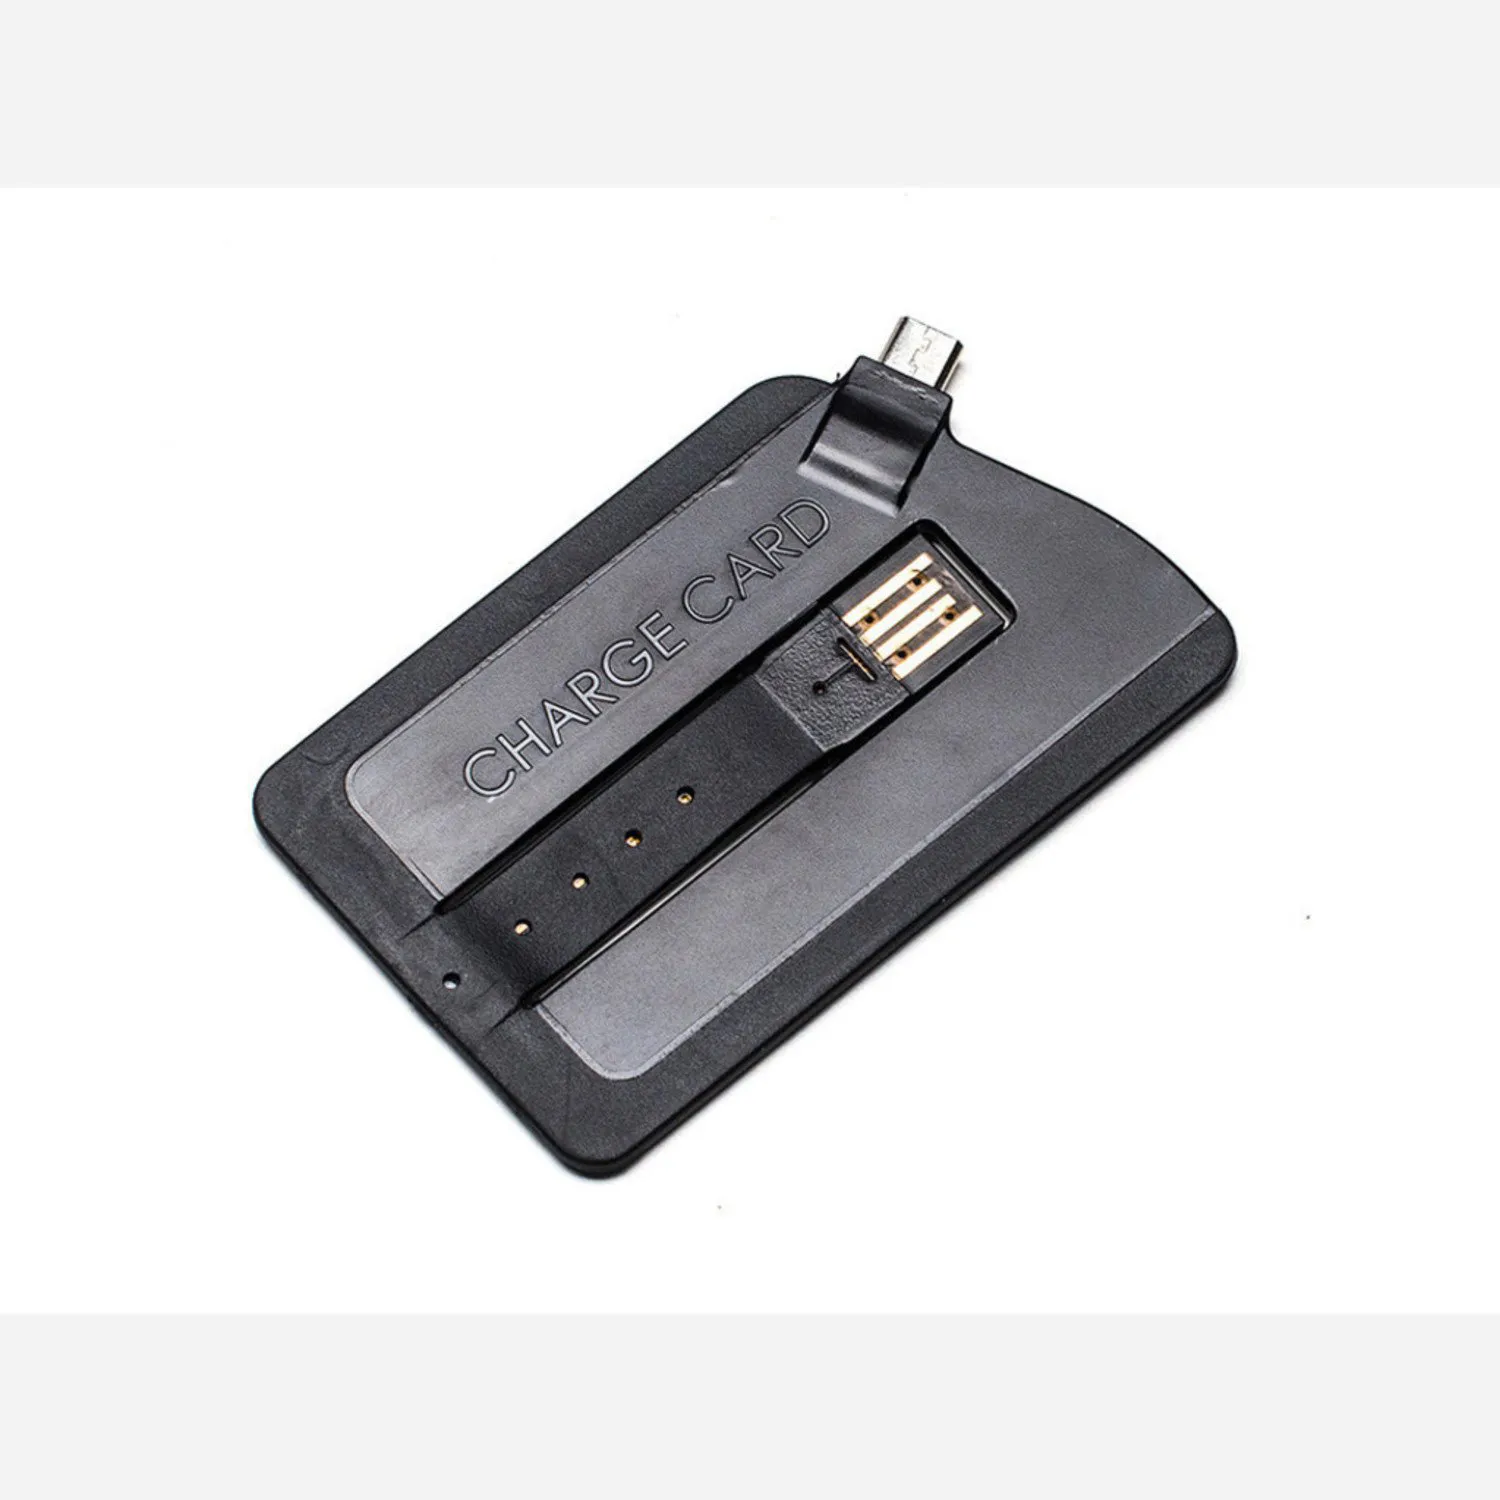 Photo of CHARGECARD Thin Micro USB for Android / Device Charging Cable